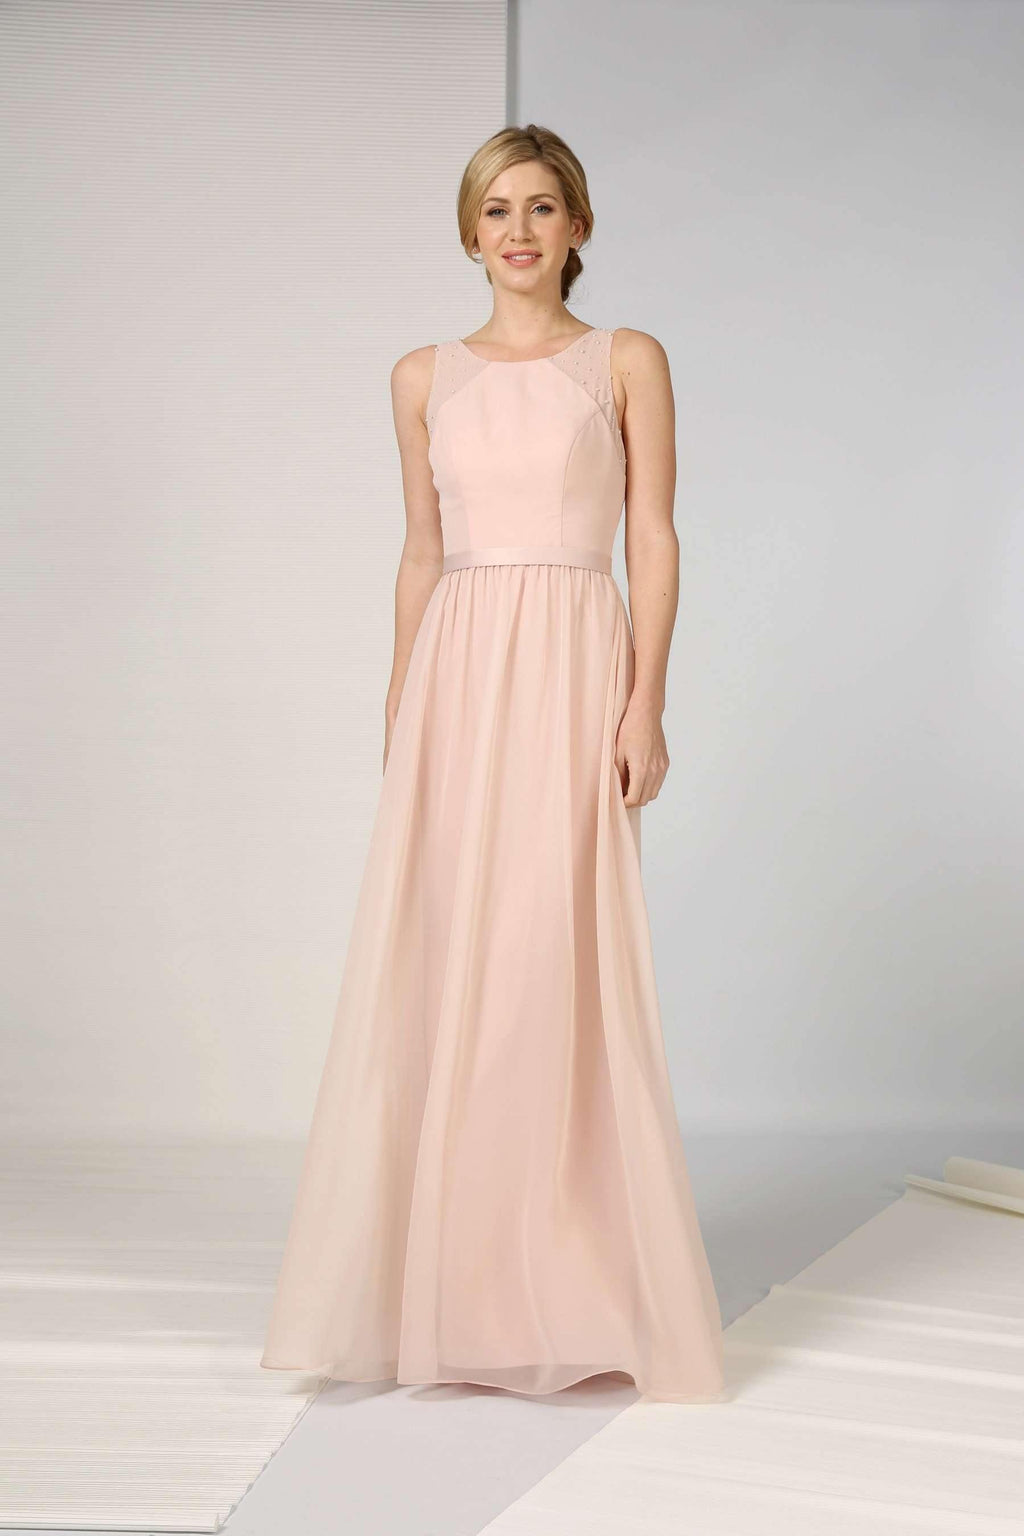 Lisa Nieve Occasion - Adore Bridal and Occasion Wear